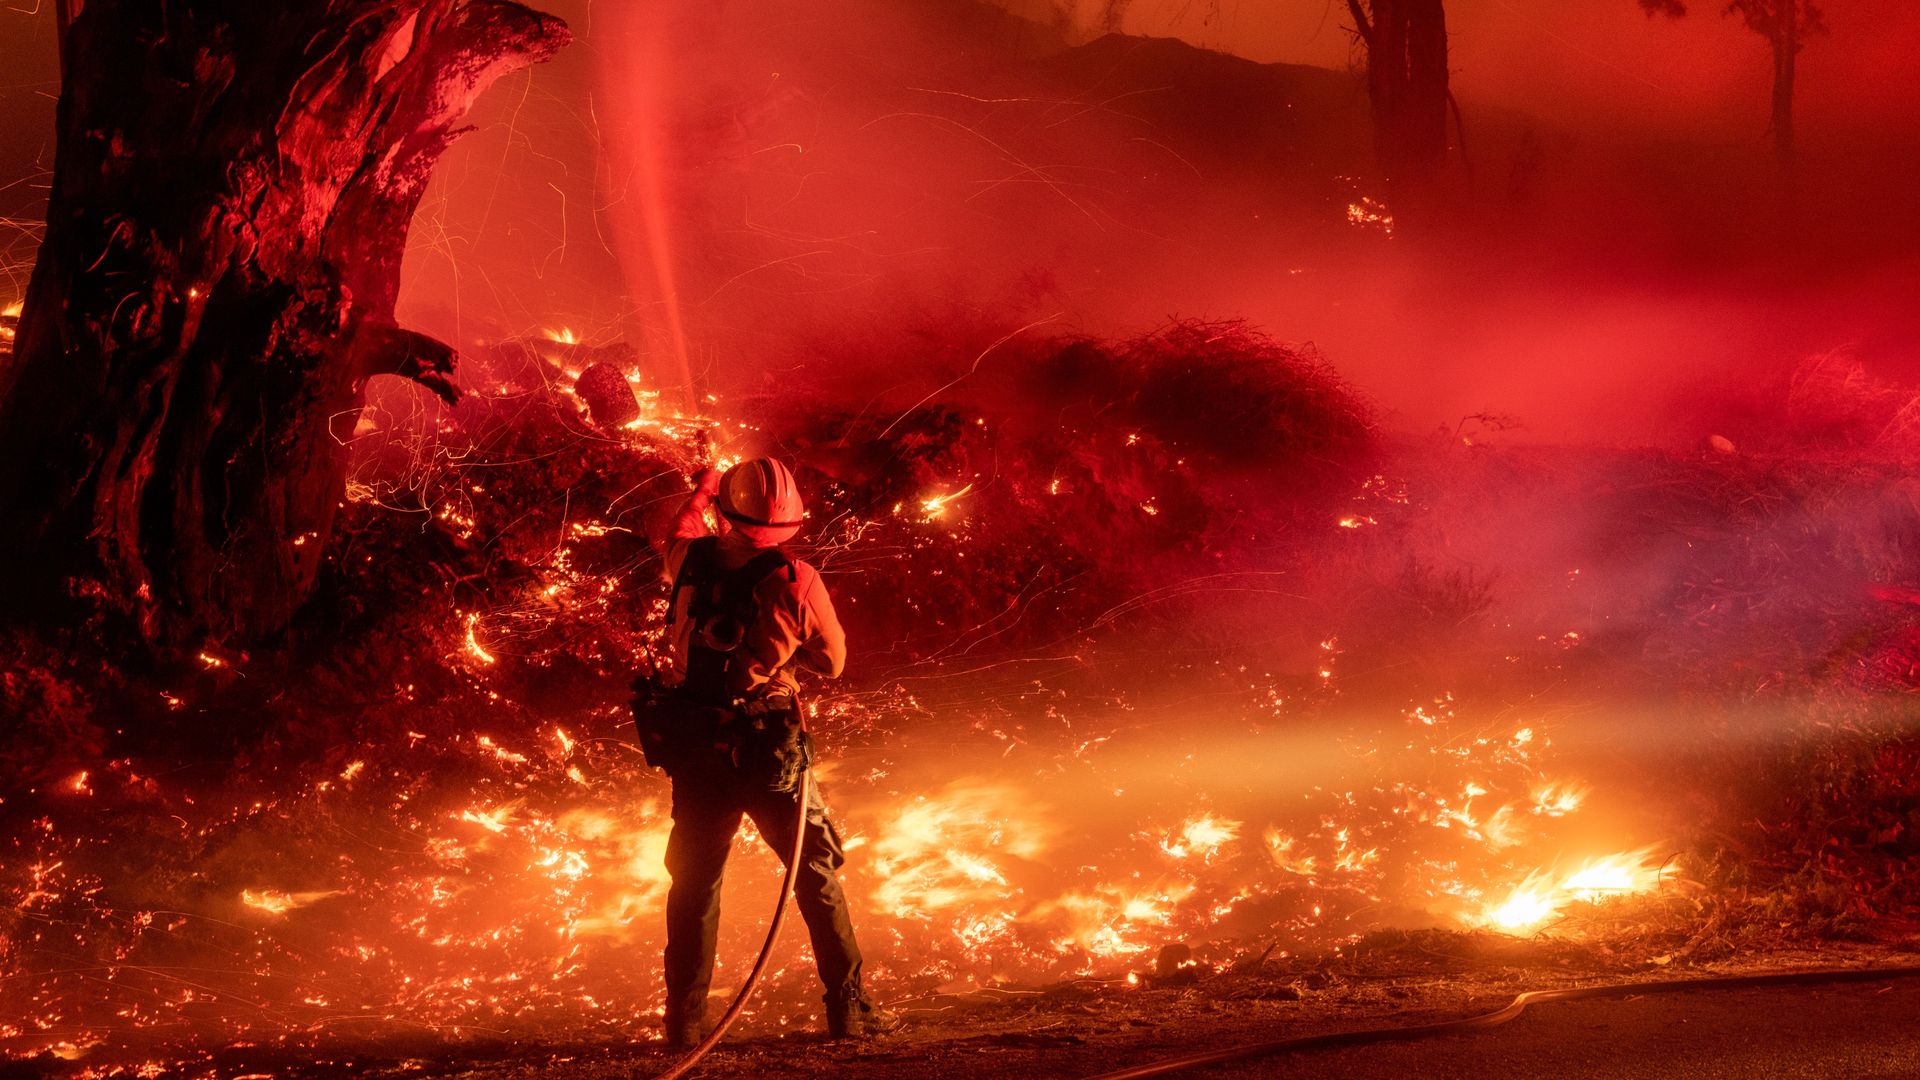 A firefighter douses flames from a backfire during the Maria fire in Santa Paula, California on November 1